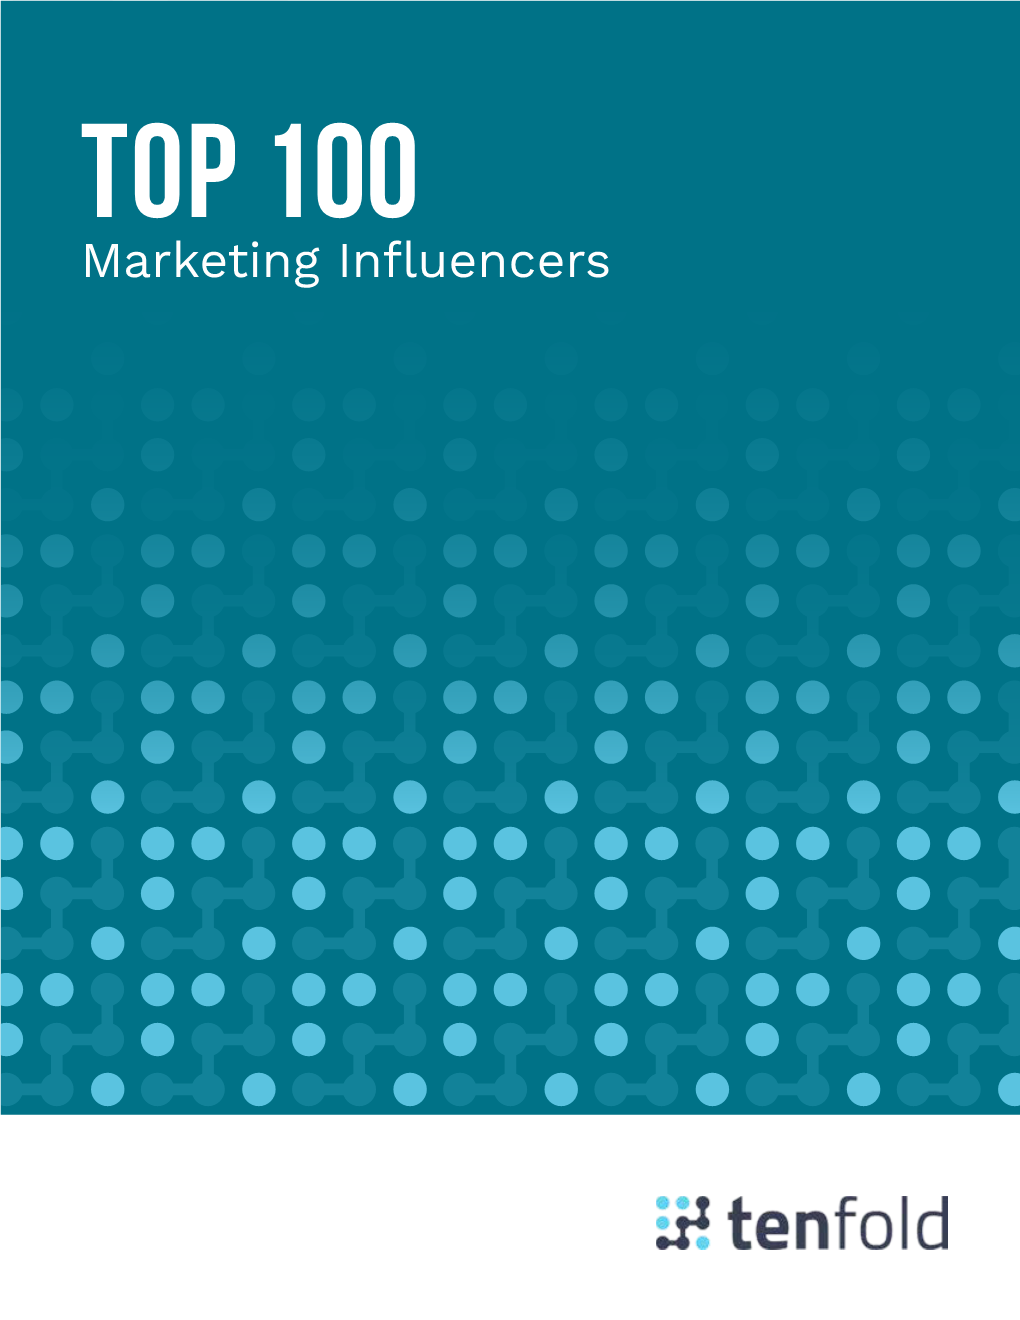 Top 100 Marketing Influencers 03TOP 100 Marketing Influencers TABLE of Contents 01 Why